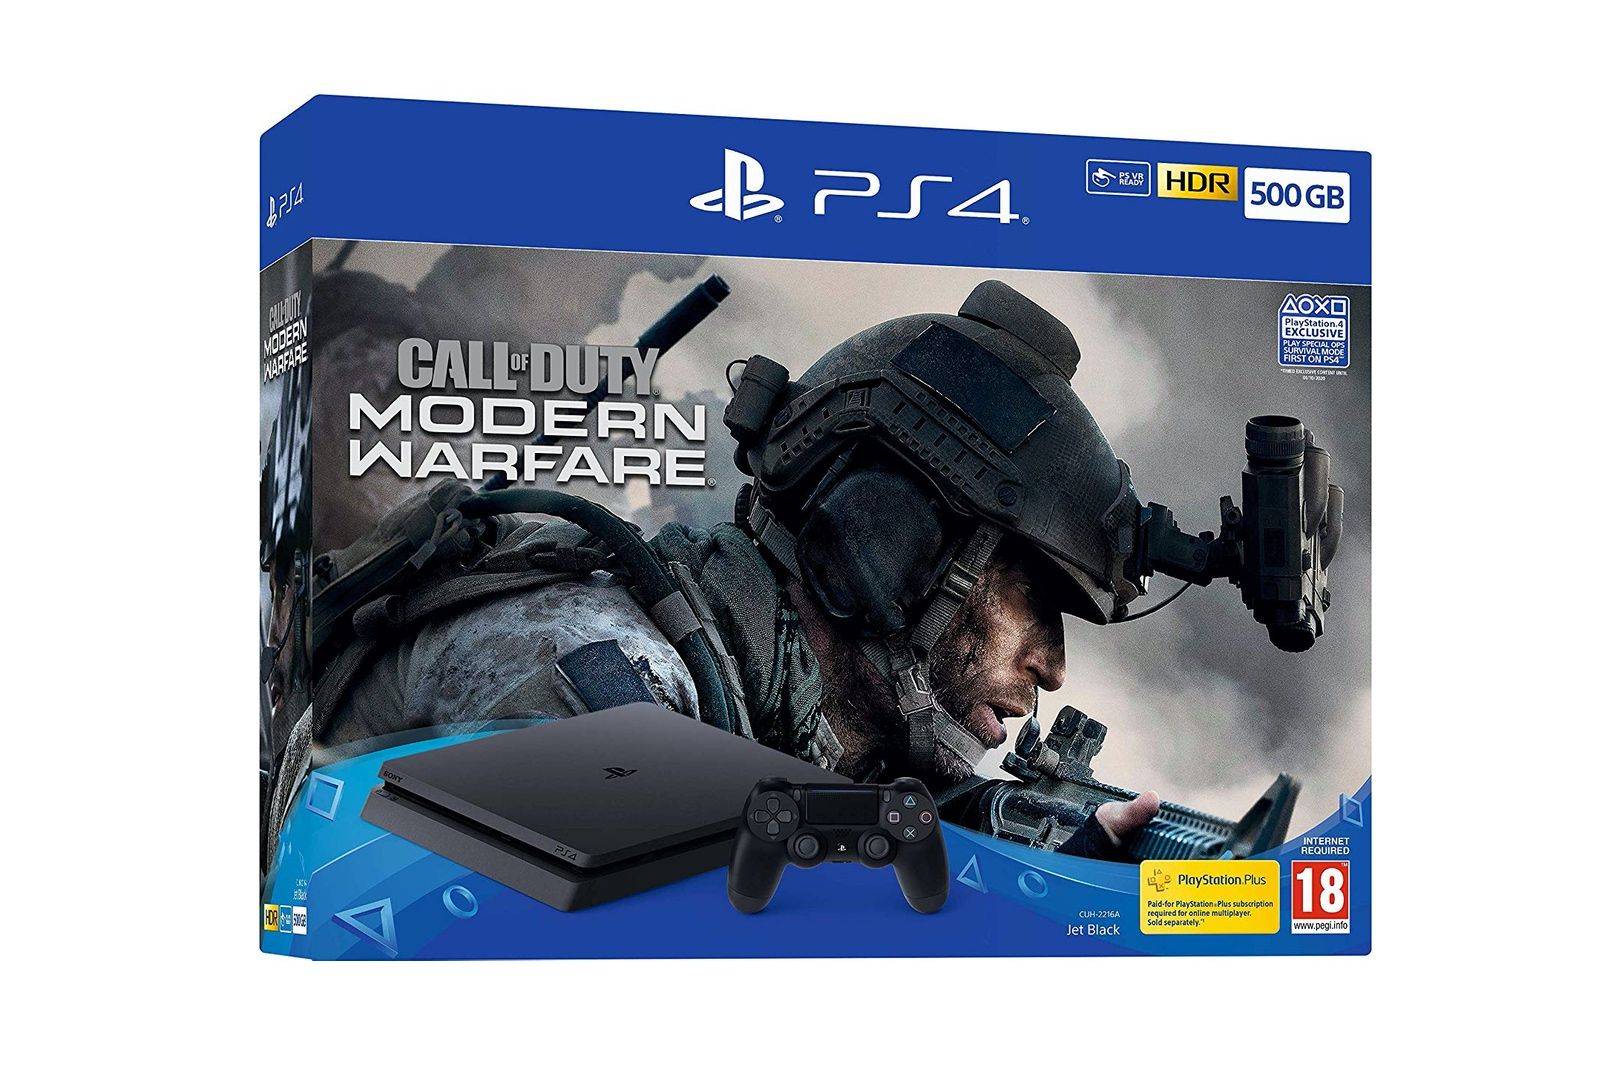 The Best Playstation 4 Bundles Great Deals On Ps4 Consoles And Games image 3